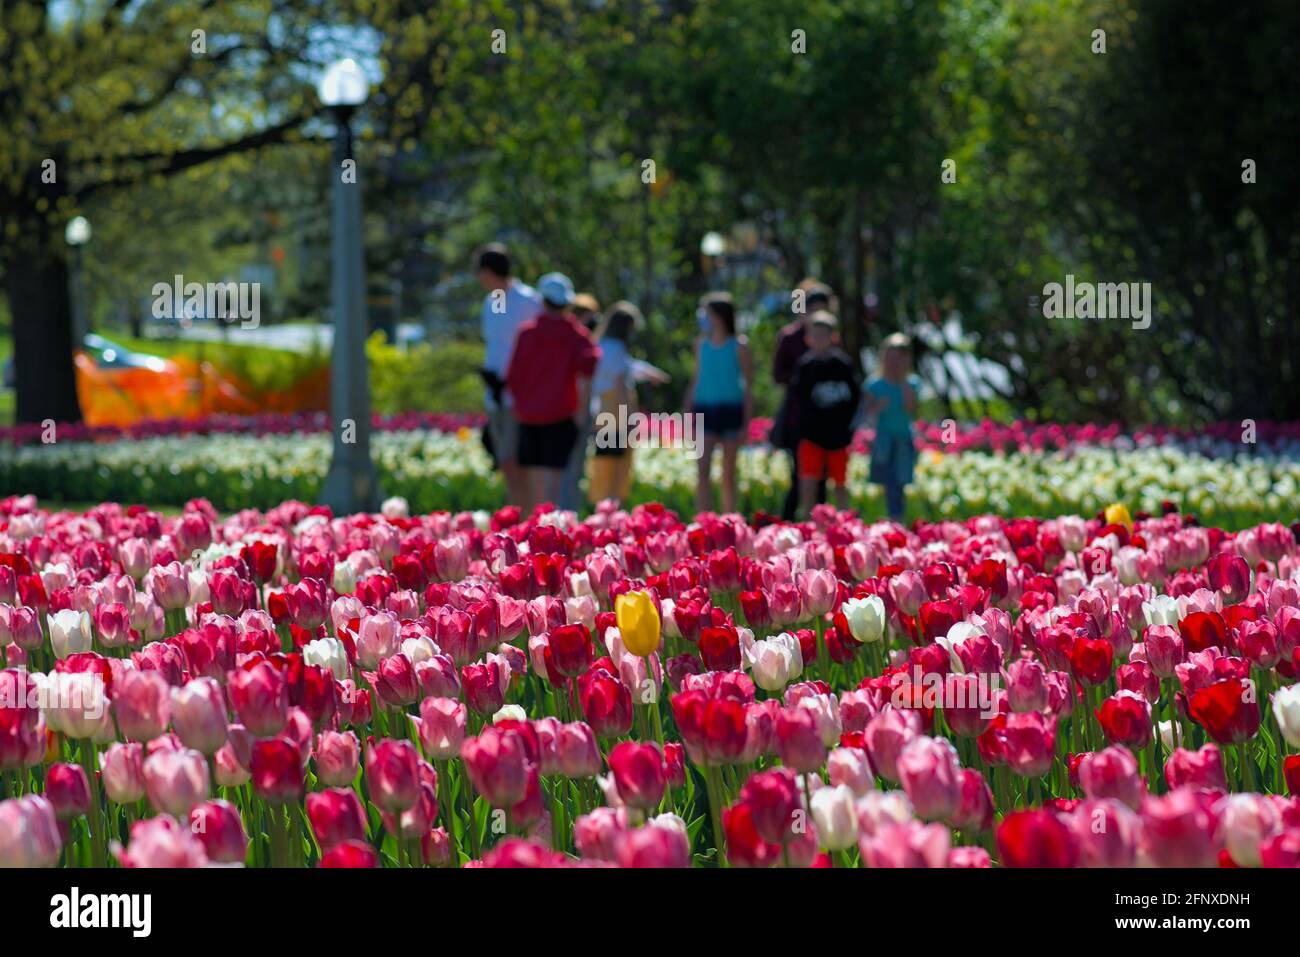 Smaller COVID crowds lapping up the tulips (National Velvet, Hemisphere) at the Canadian Tulip Festival 2021 in Ottawa, Ontario, Canada. Stock Photo